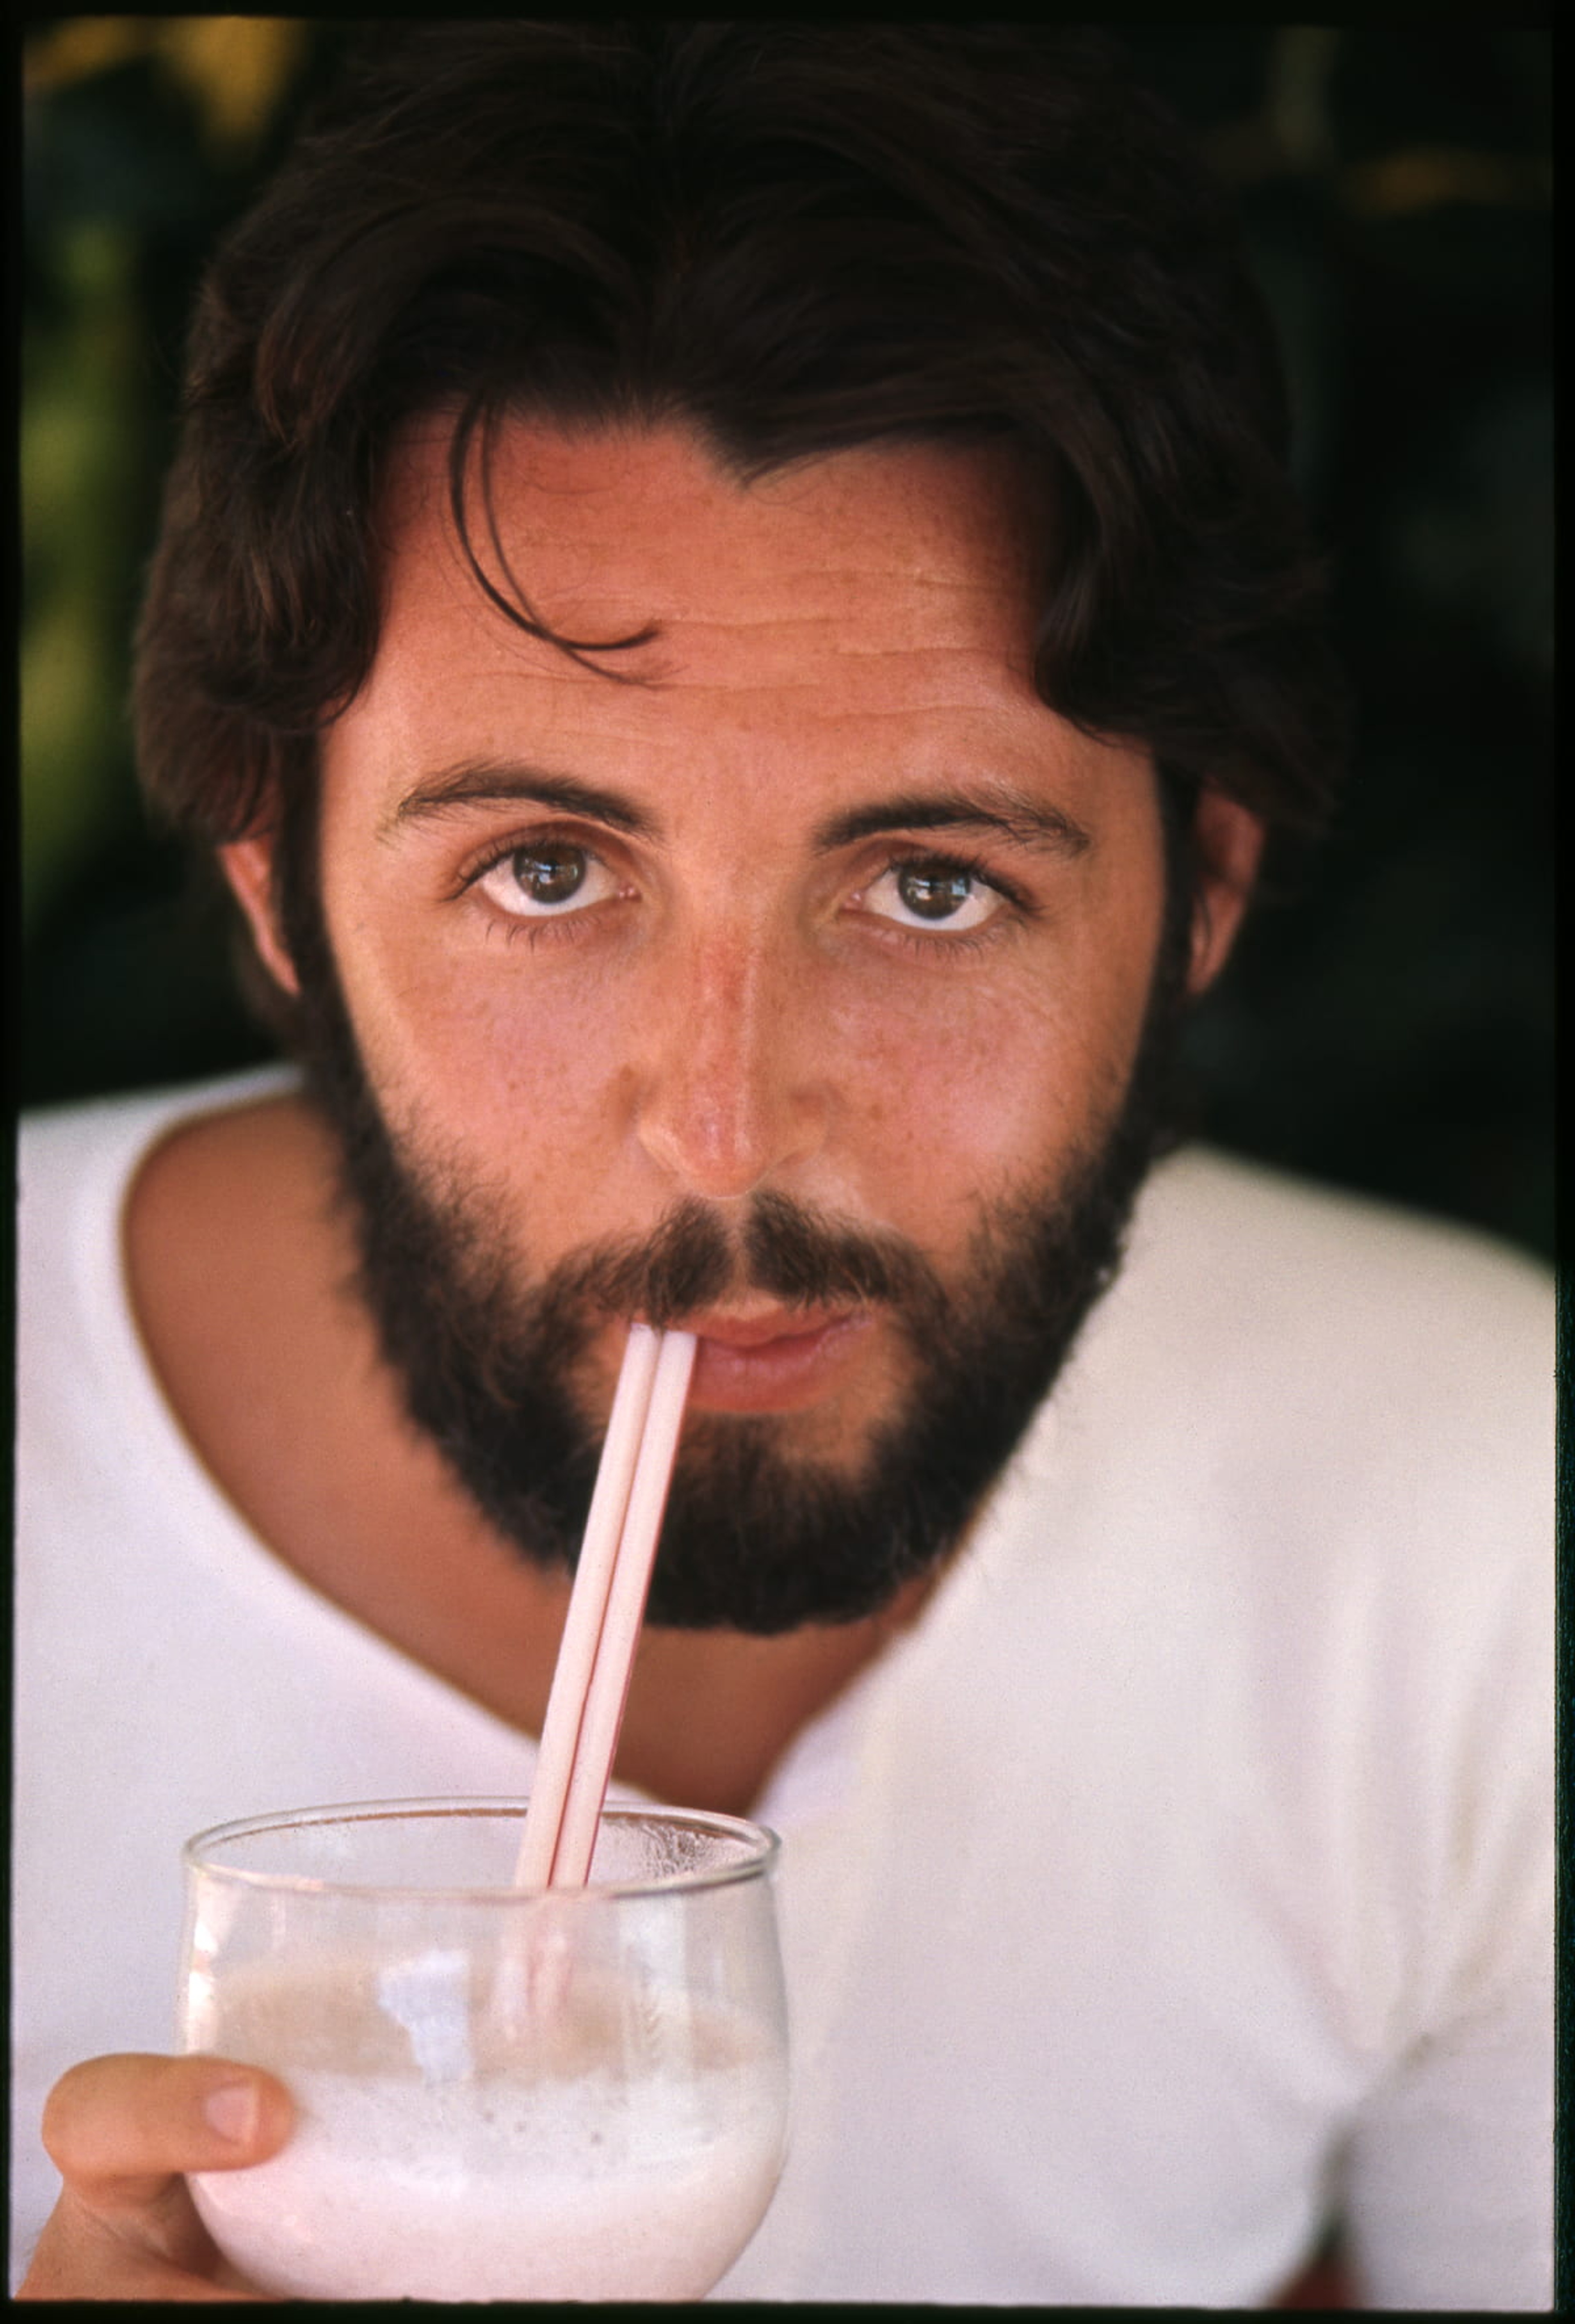 Photo of Paul sipping from a straw